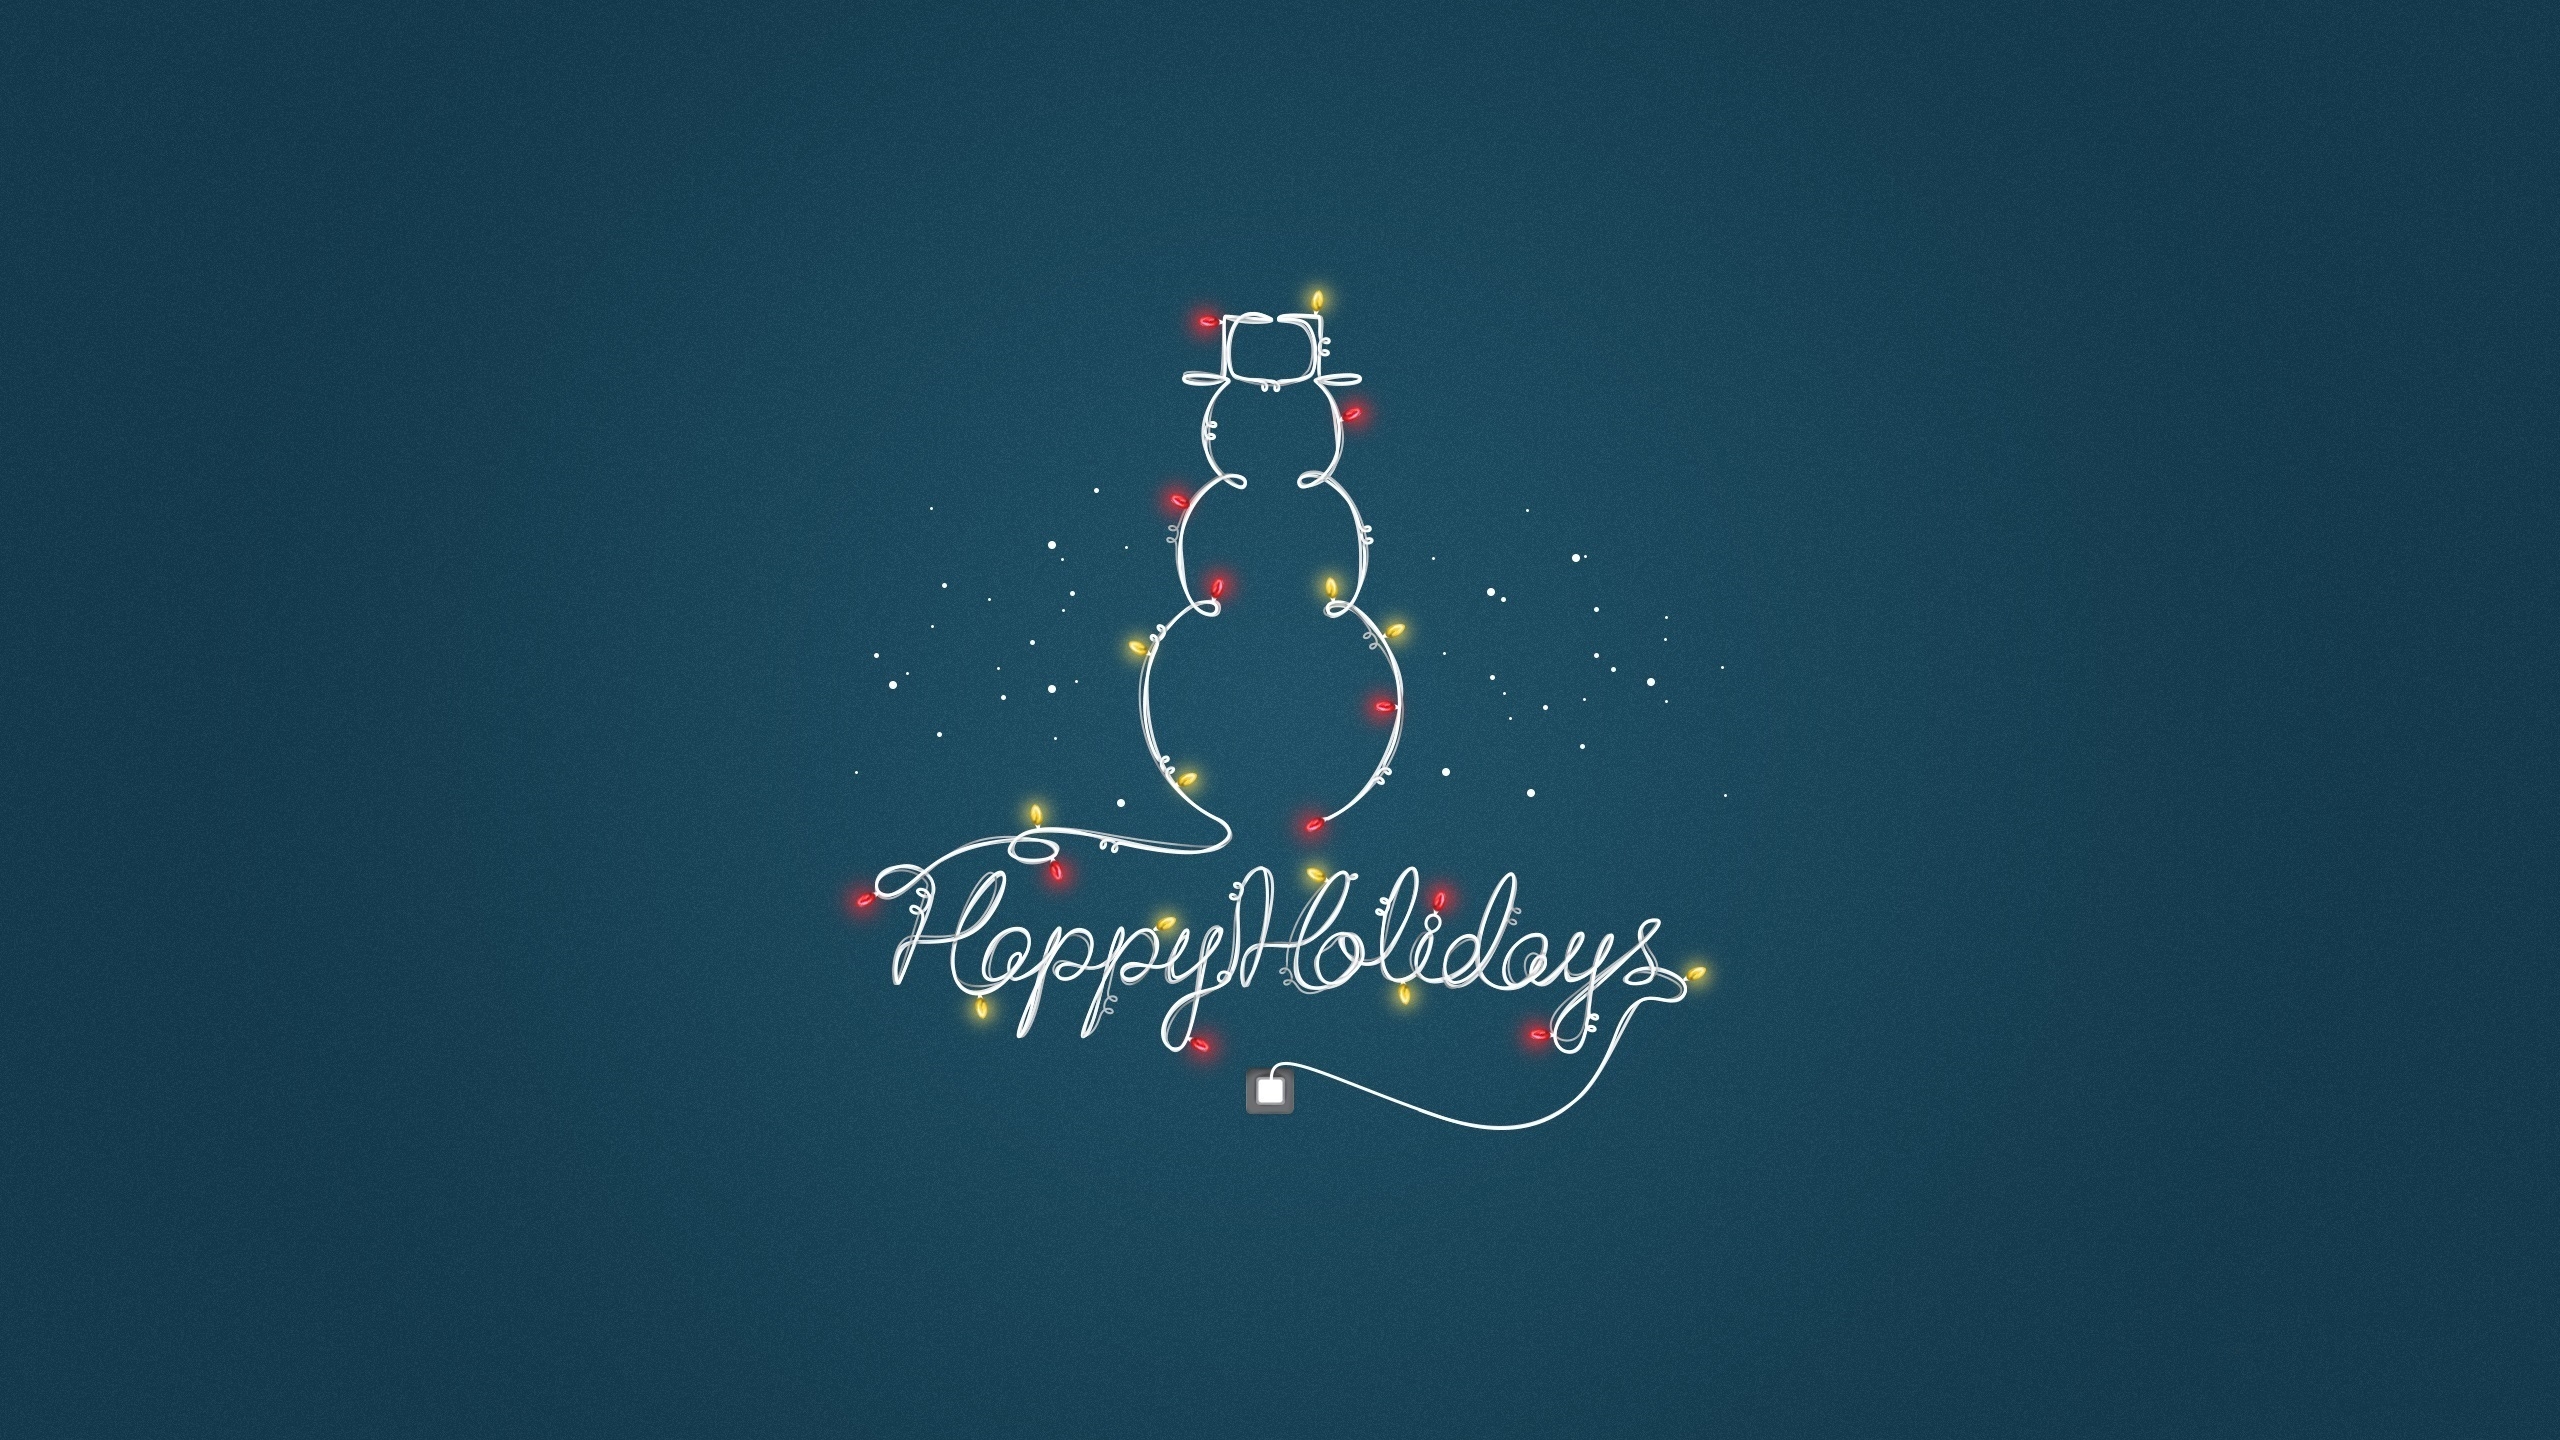 Wish You Happy Holidays for 2560x1440 HDTV resolution